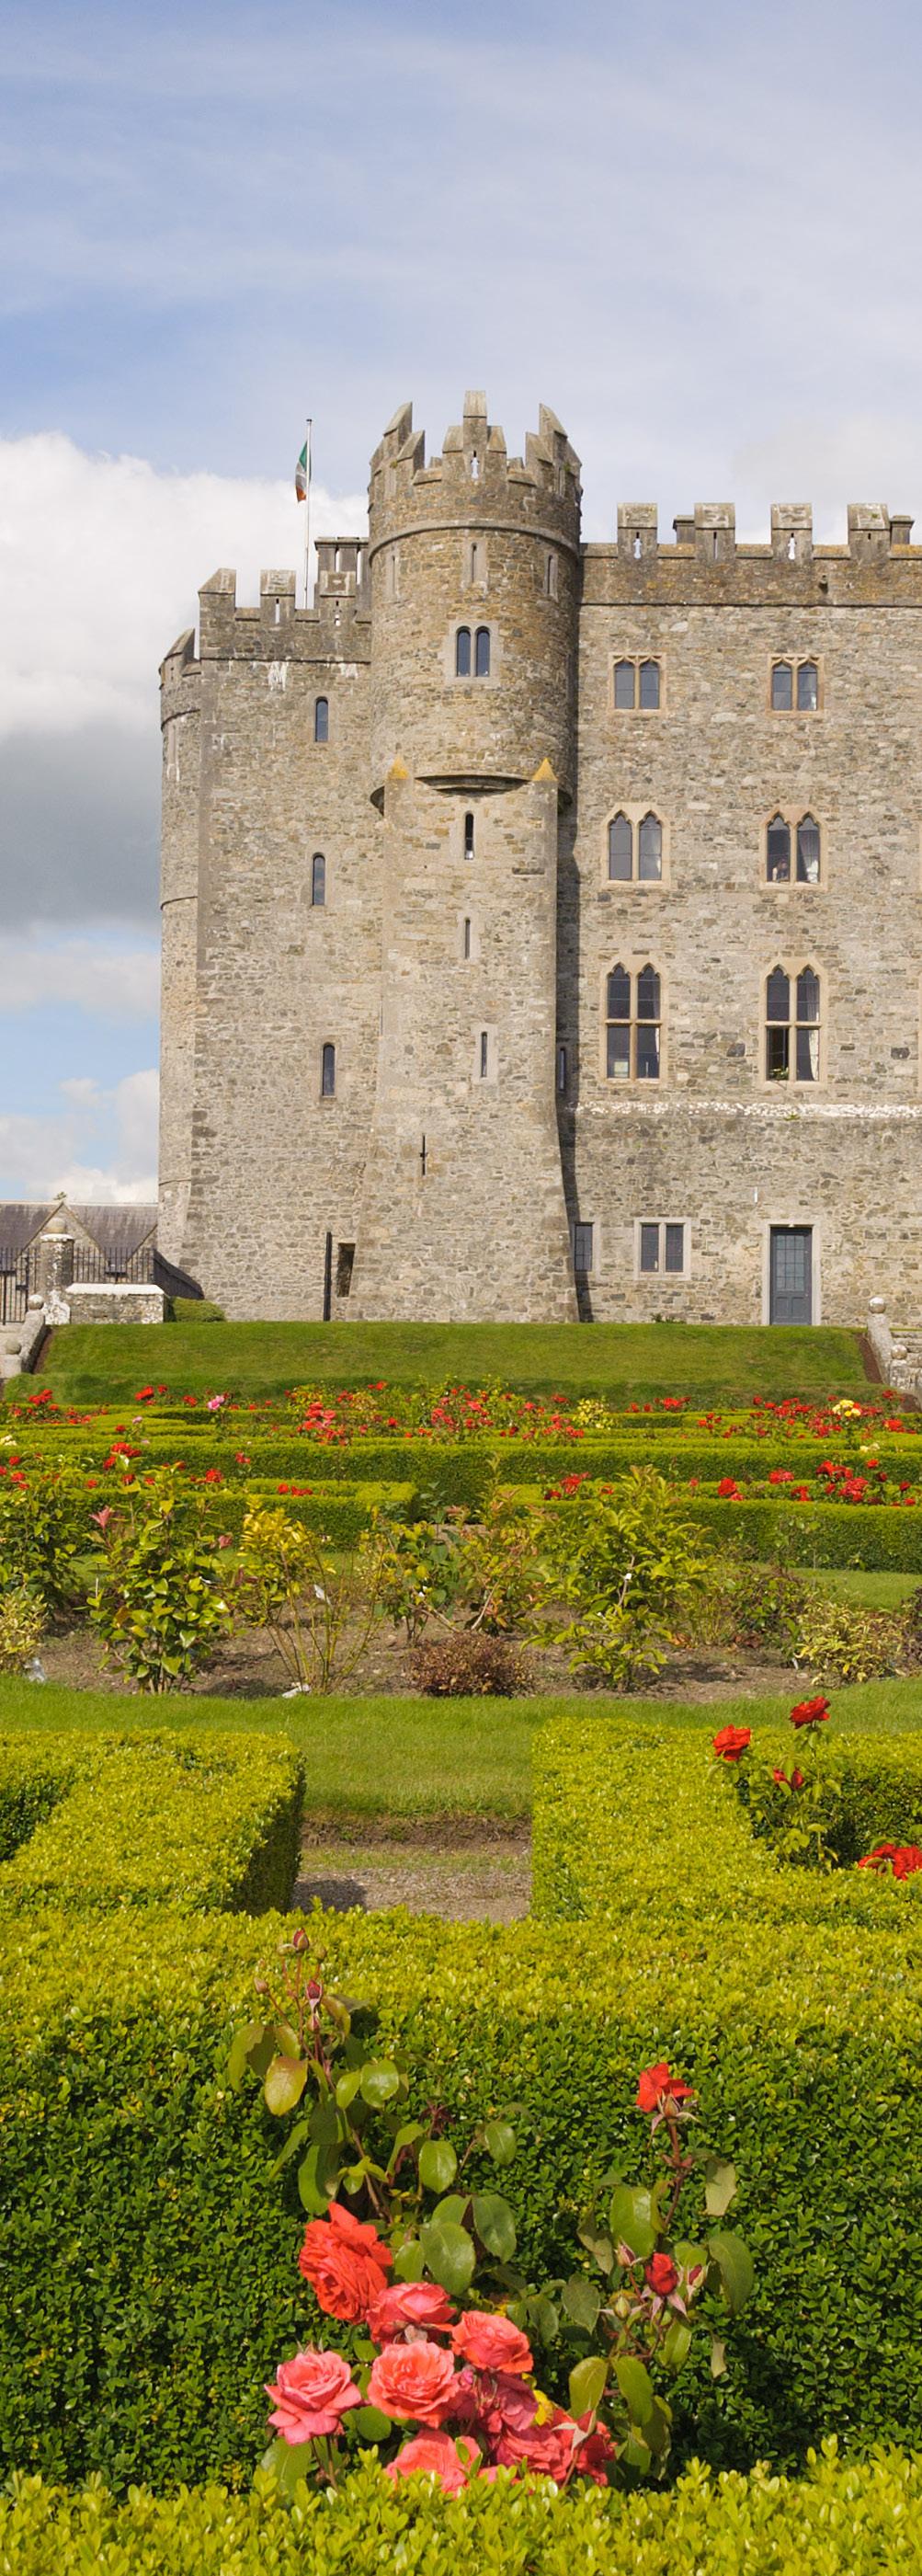 Plan your next Event at Kilkea Castle... Conferences & Meetings Just one hour s drive from Dublin, Kilkea Castle provides an incomparable setting for a Meeting or Event.